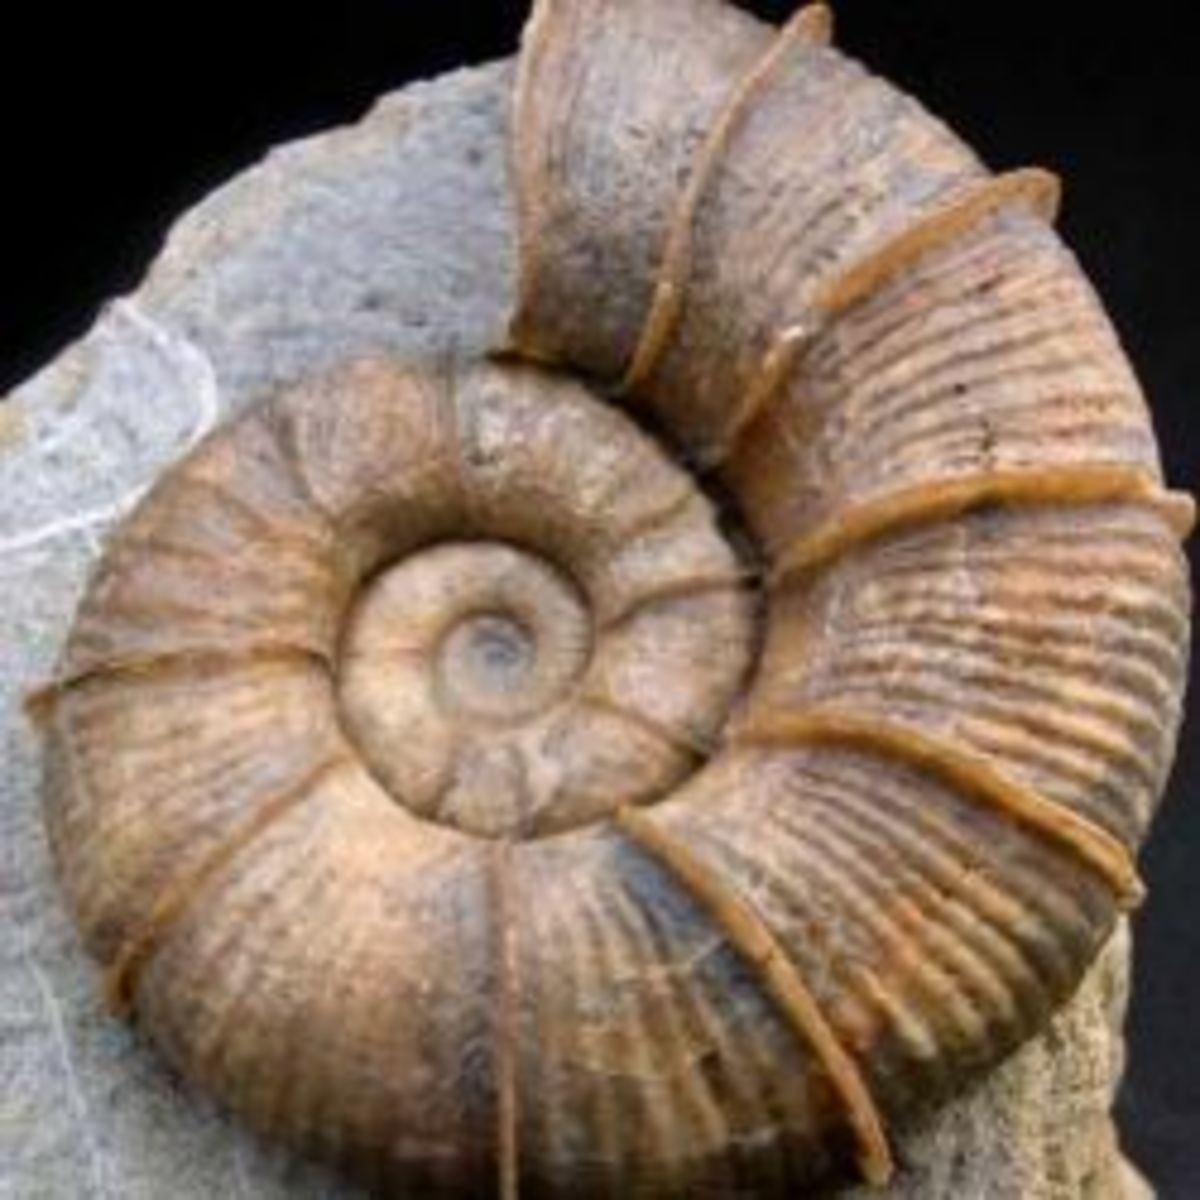 Fossils Lesson from a Christian Perspective